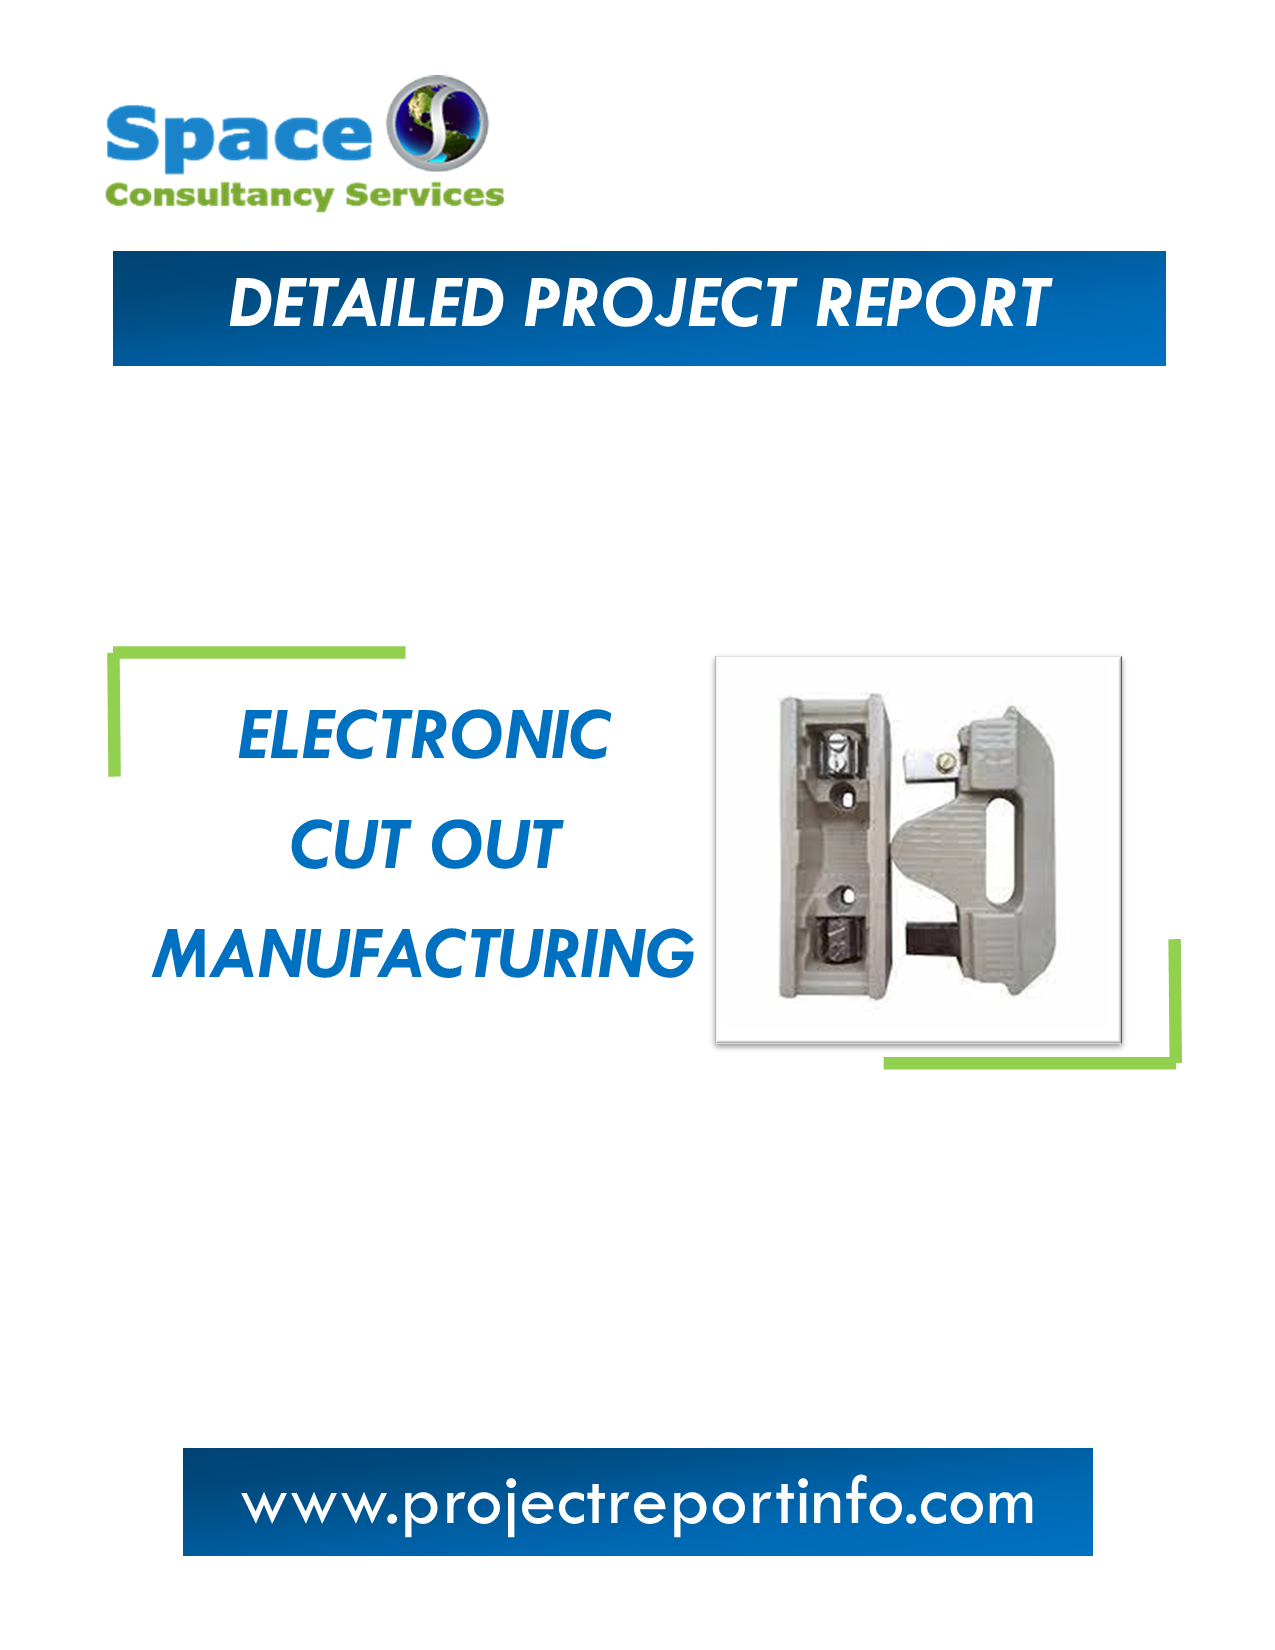 Project Report on Electronic Cut Out Manufacturing